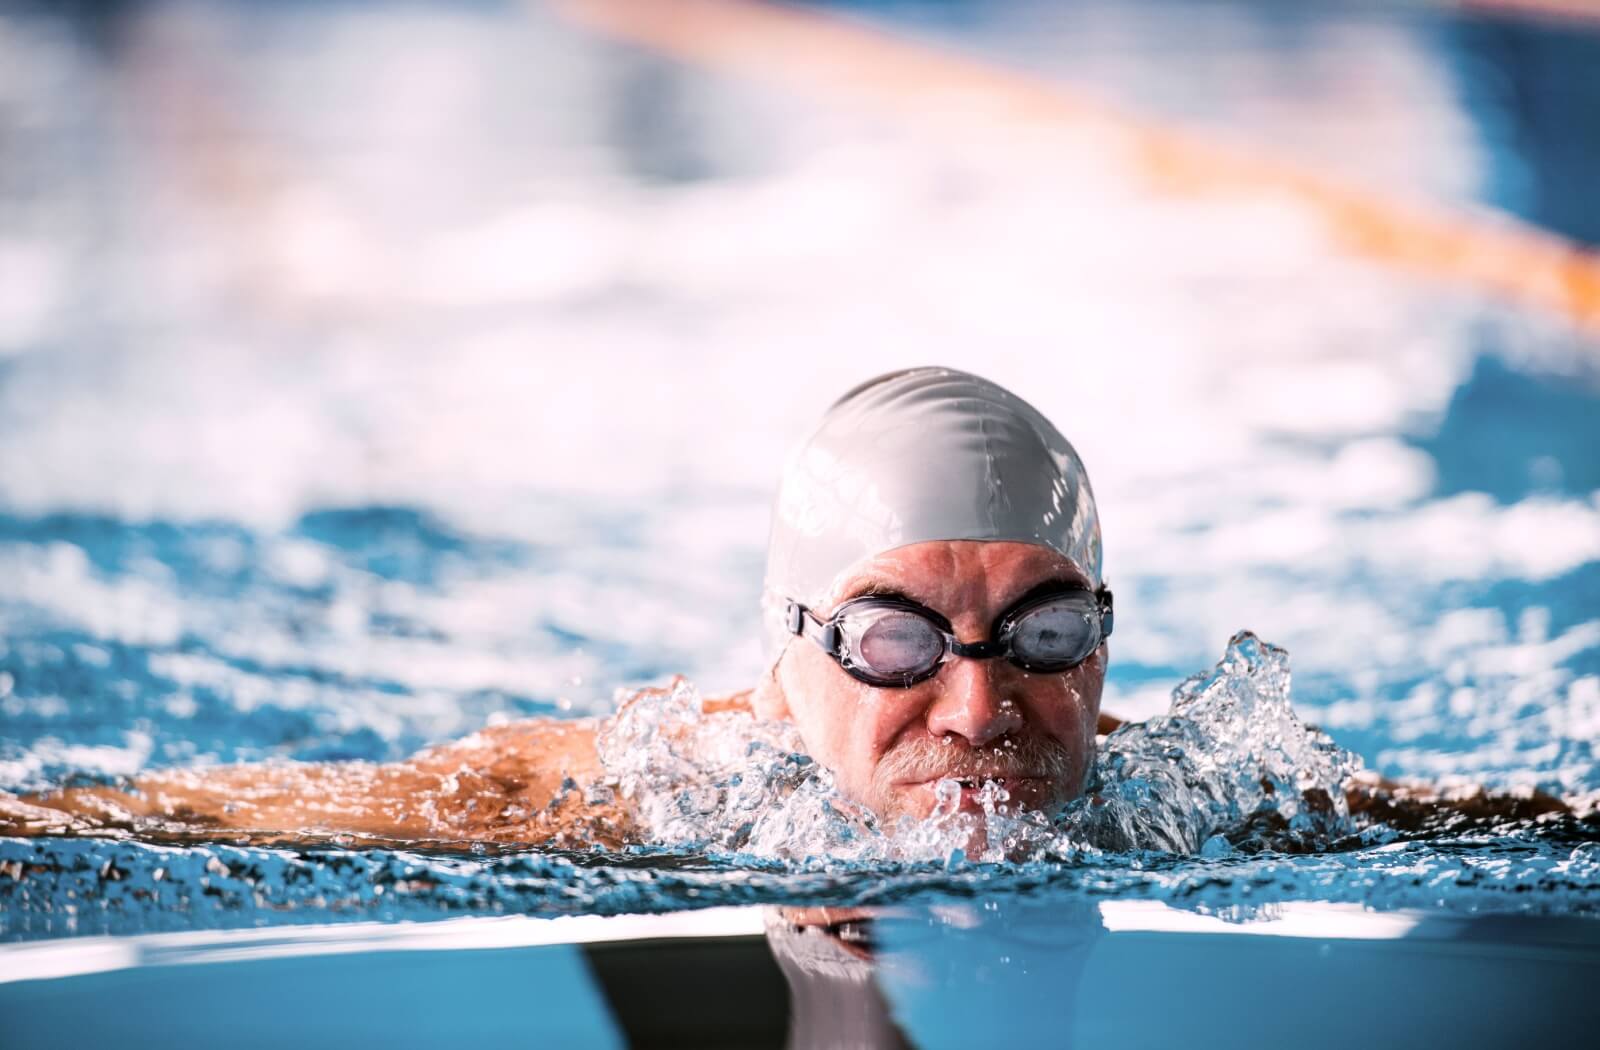 A senior in swim goggles and a cap swimming in a pool to build his strength and endurance.